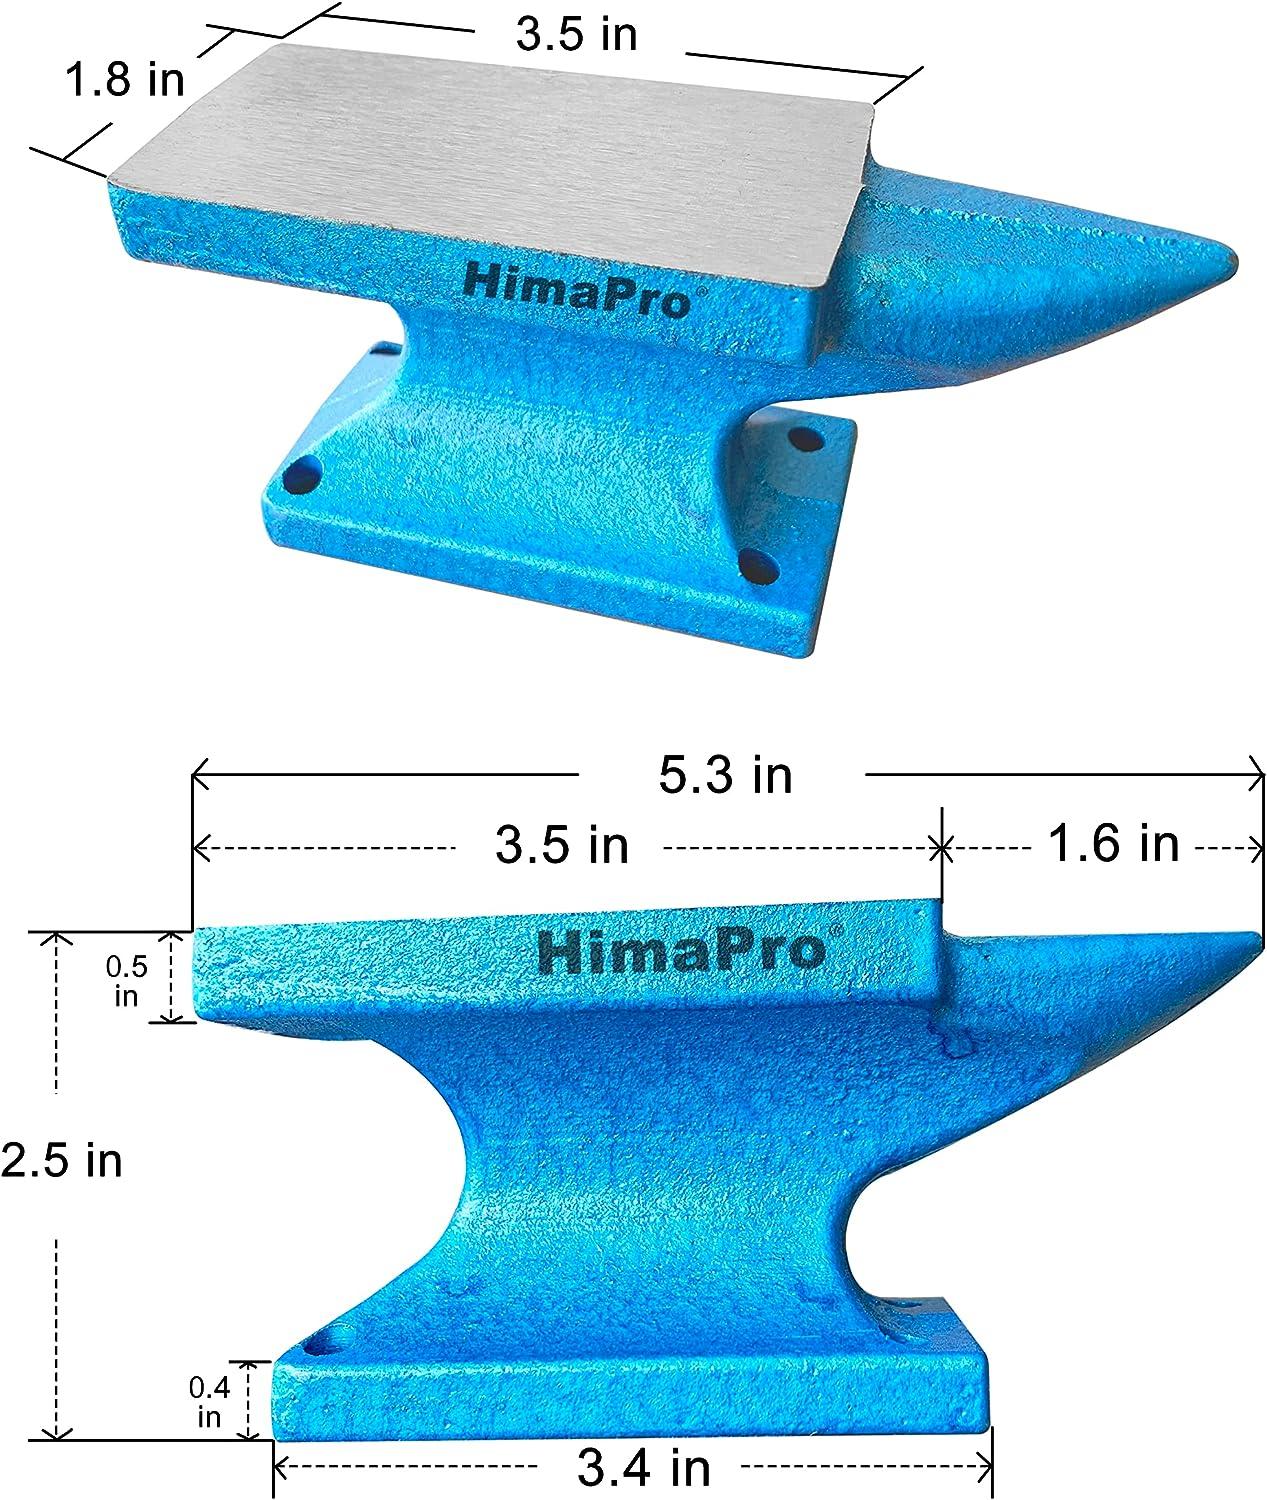 HimaPro Single Horn Anvil for Jewelry Making - 2.2 lbs Cast Iron Mini Anvil-  A Wonderful Tool for Jewelry Making and Metal Stamping